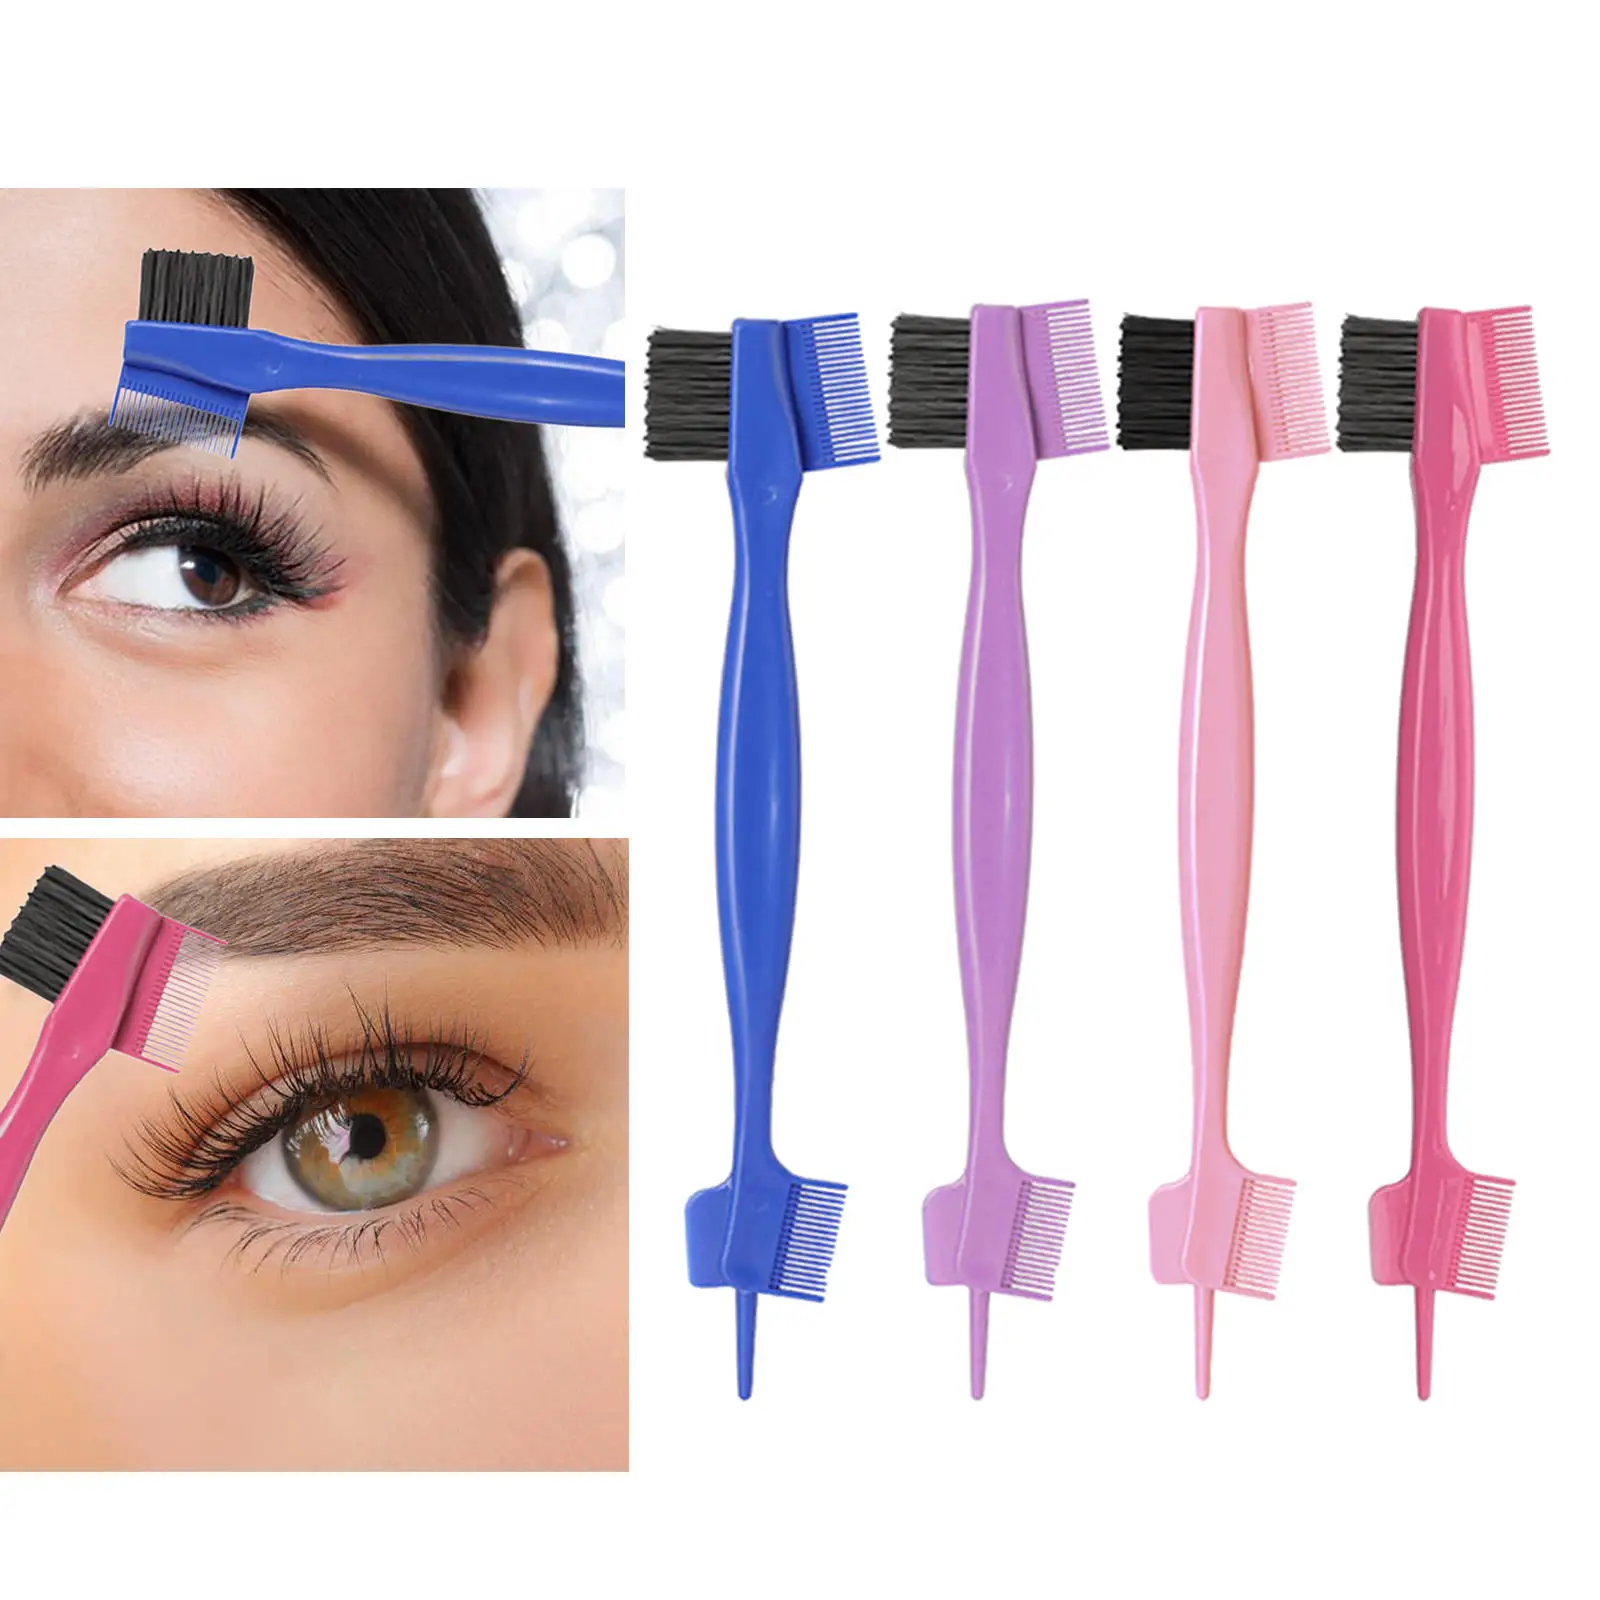 Eyebrow Brush Comb Multifunctional Double-Sides Professional Portable Plastic Useful Sharper for Makeup Women Travel Hotel Girls